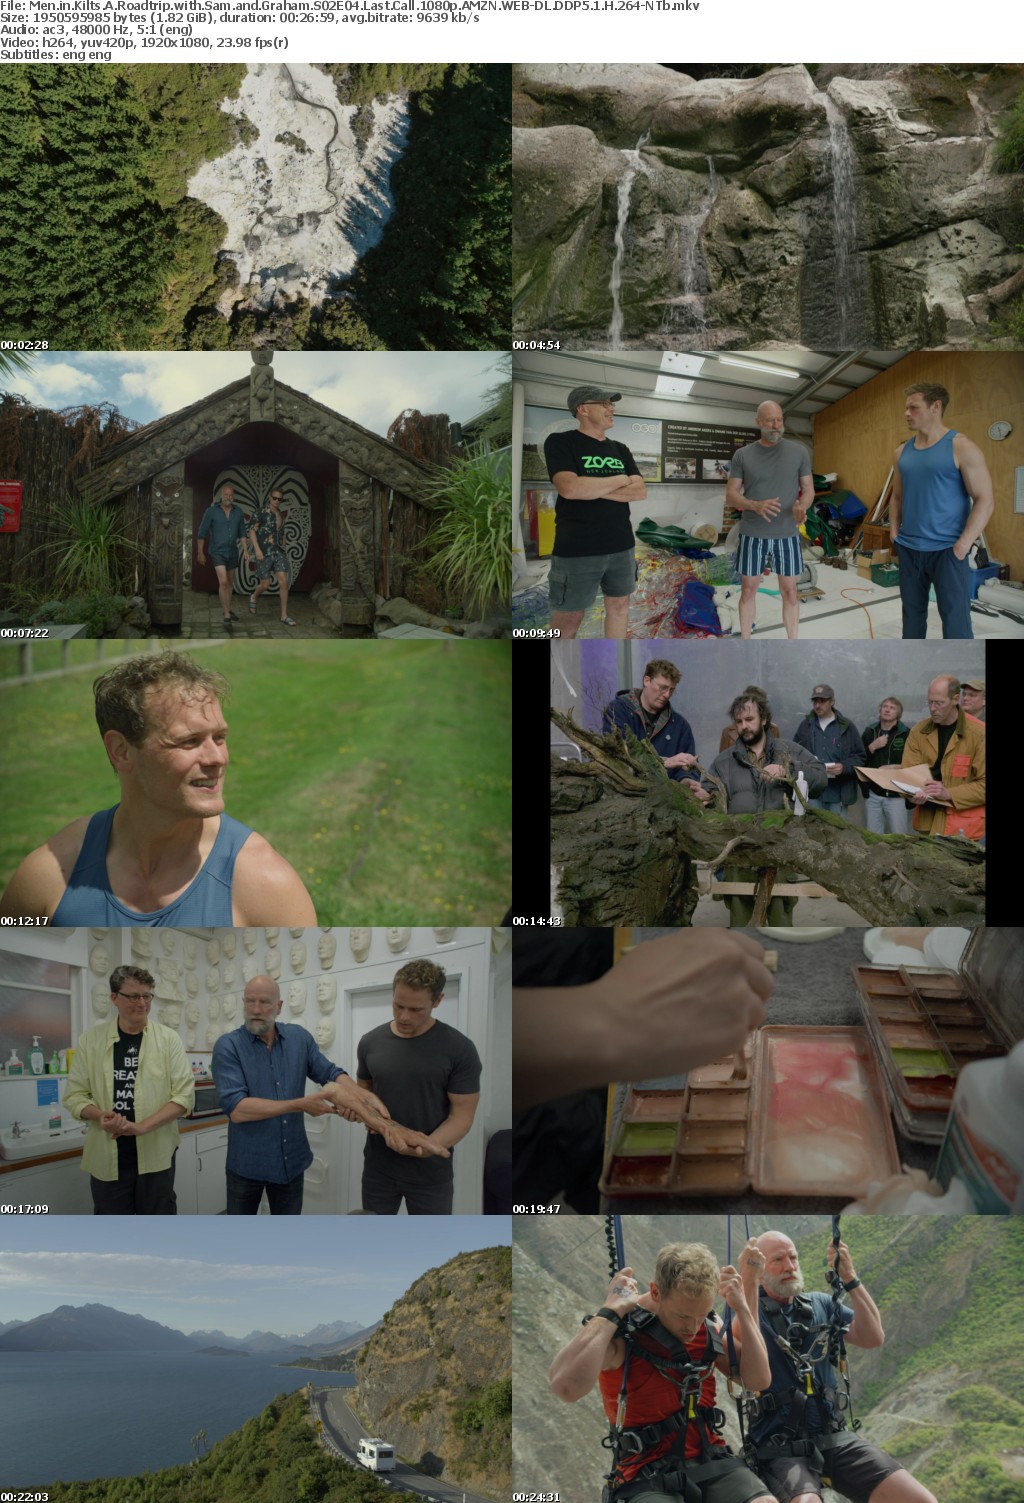 Men in Kilts A Roadtrip with Sam and Graham S02E04 Last Call 1080p AMZN WEB-DL DDP5 1 H 264-NTb